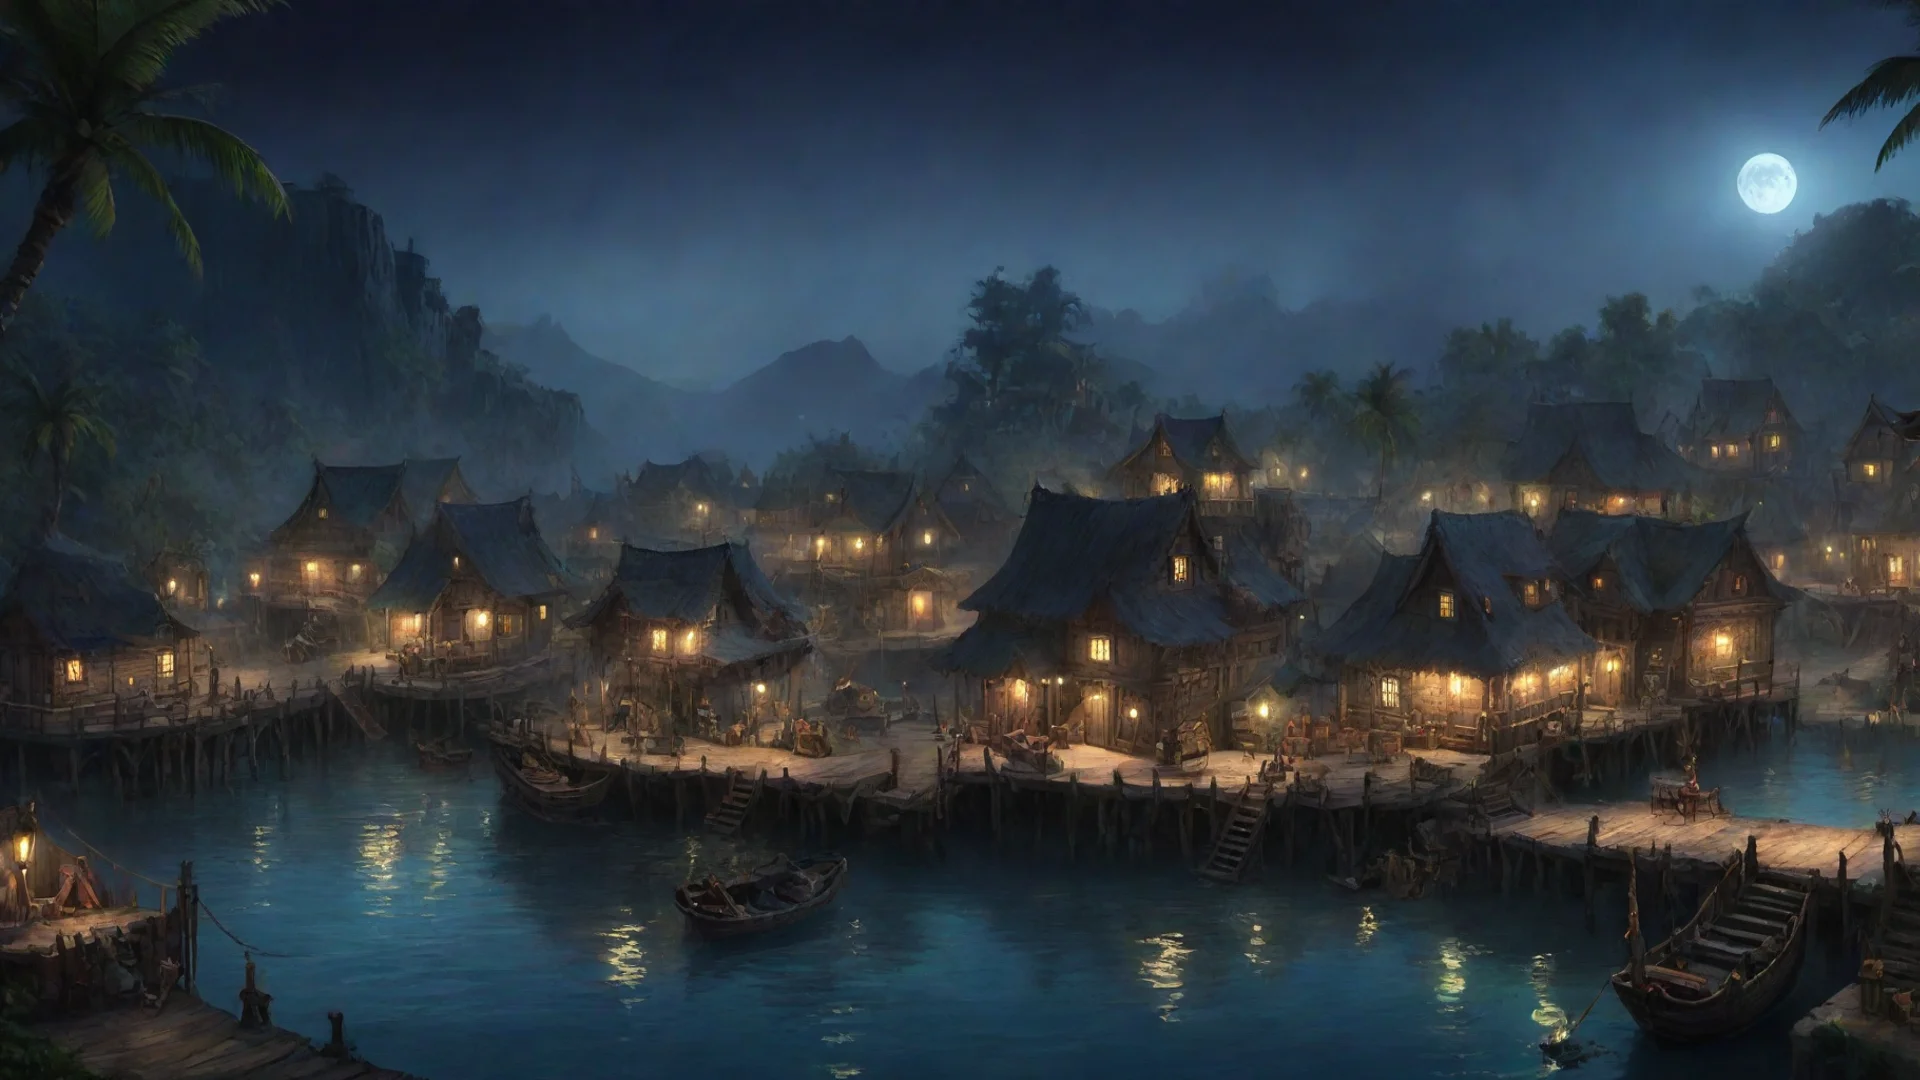 aiamazing pirate village by night concept art awesome portrait 2 wide